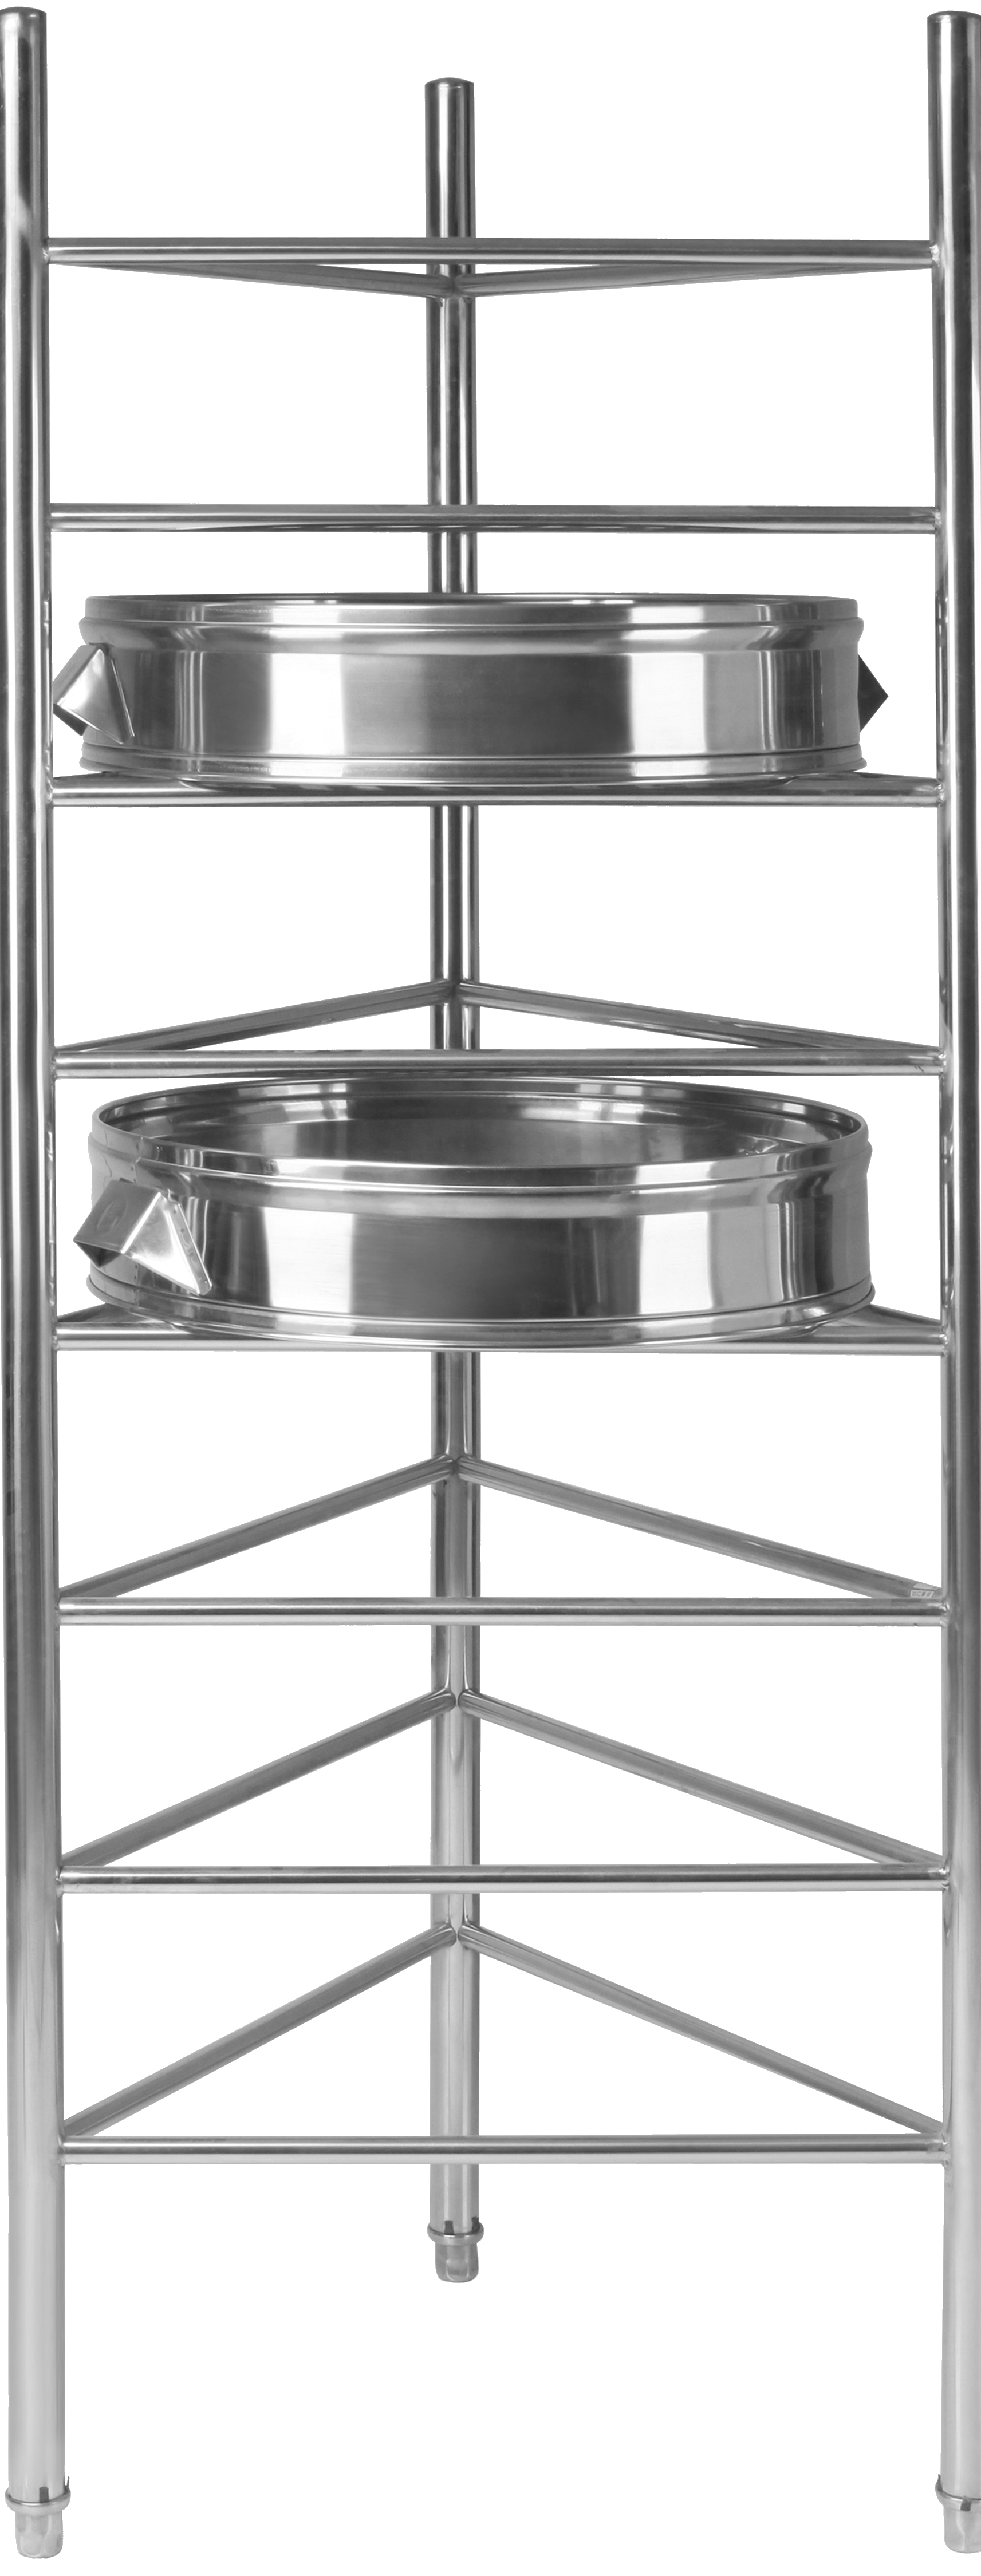 Eight-Layers Stainless Steel Steam Rack